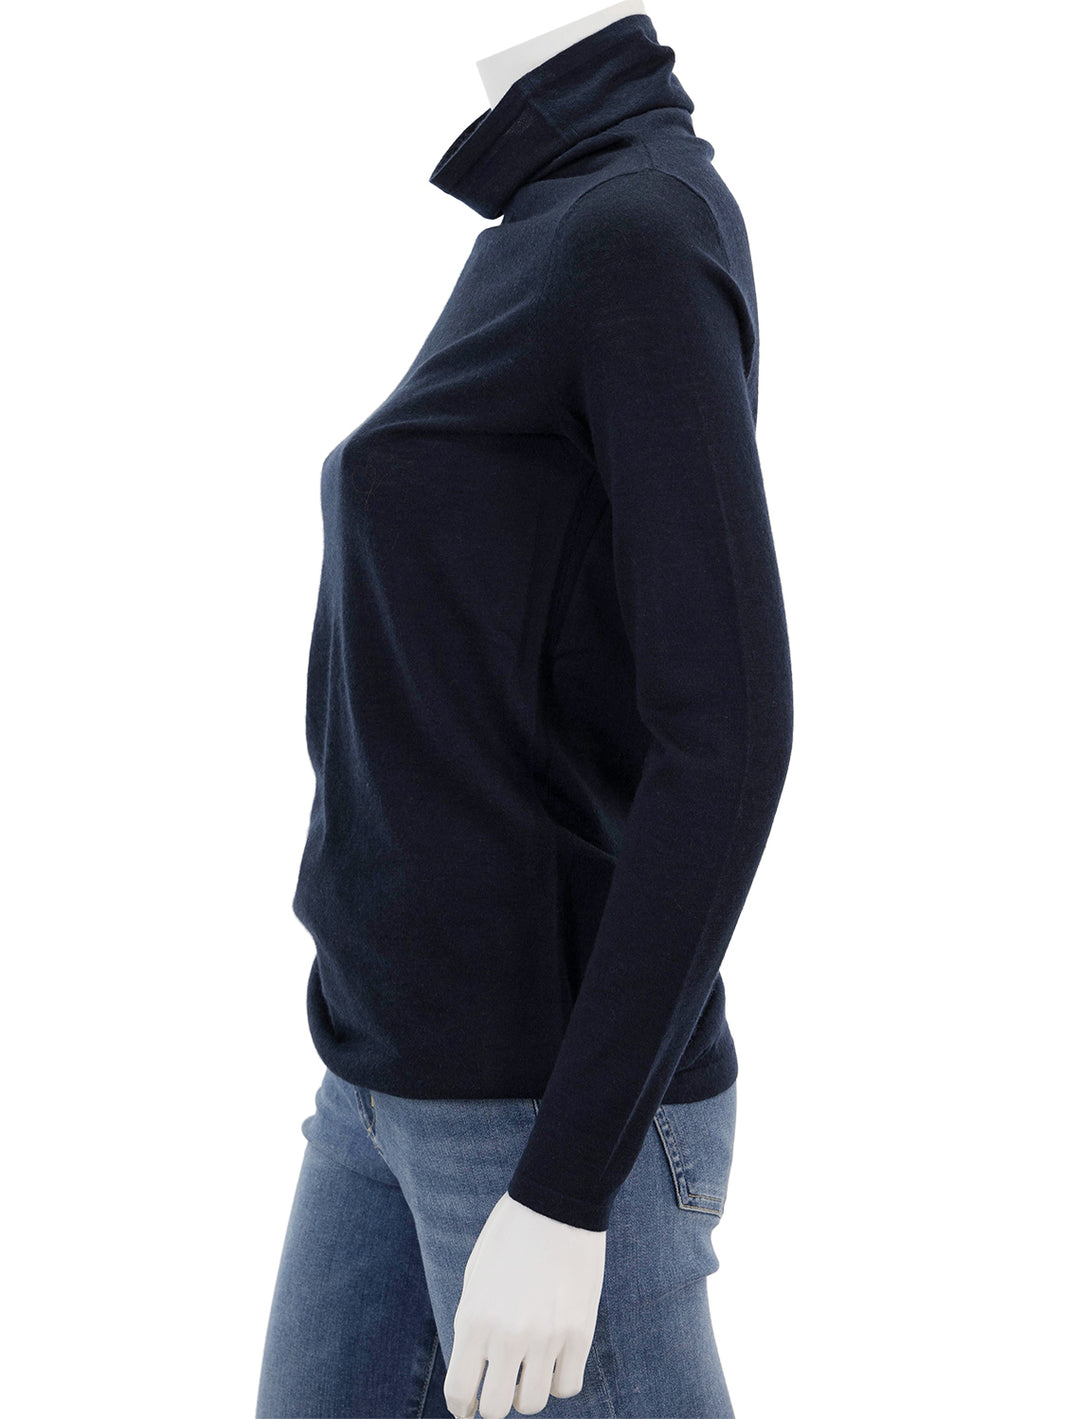 Side view of Ann Mashburn's funnel neck cashmere sweater in navy.